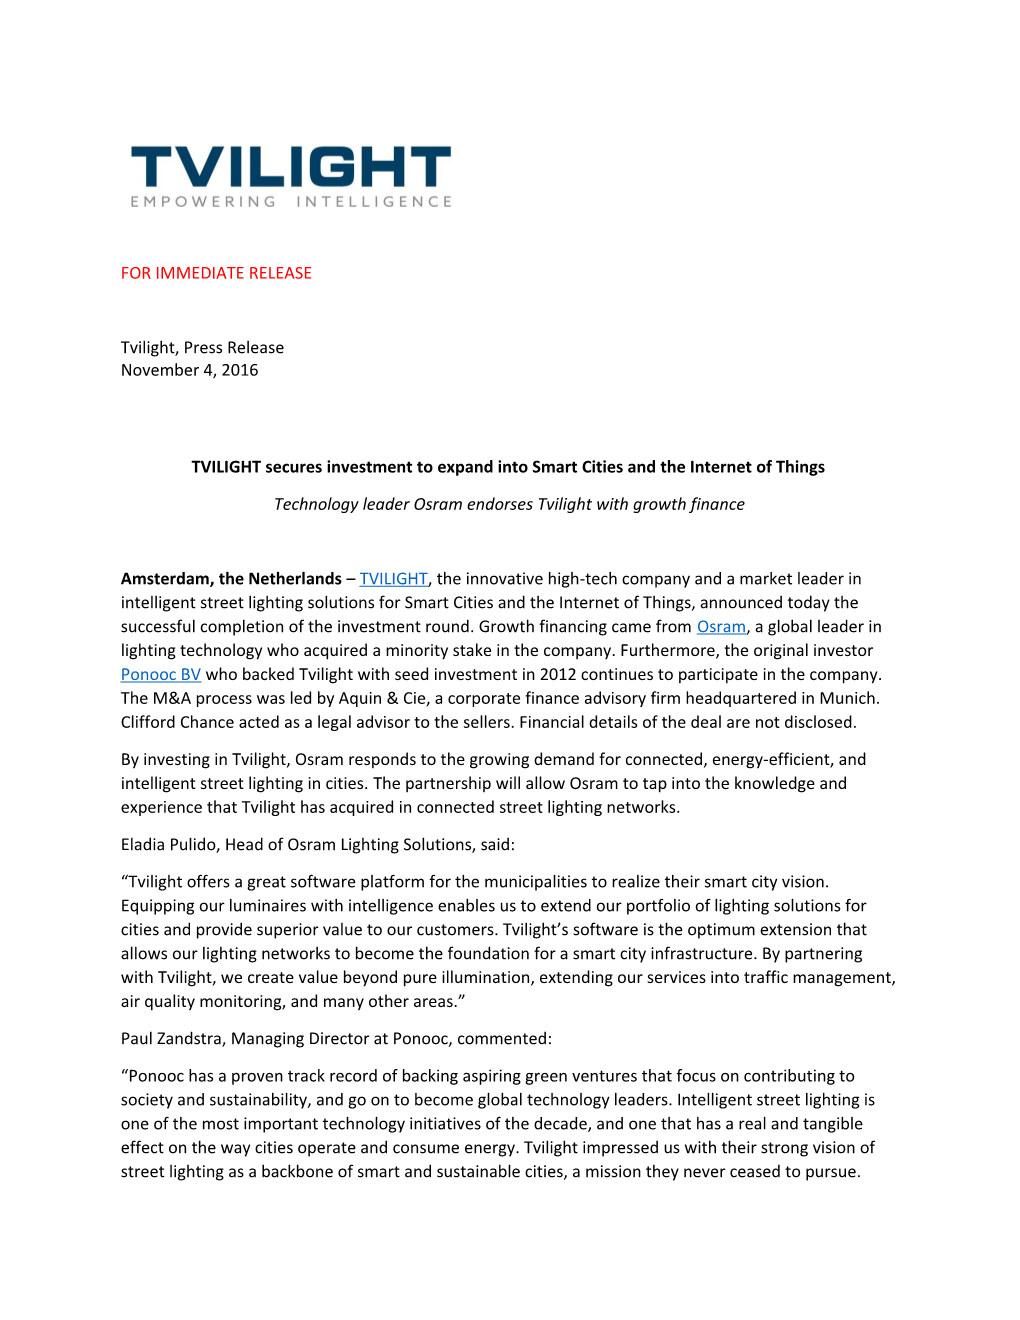 TVILIGHT Secures Investment to Expand Into Smart Cities and the Internet of Things